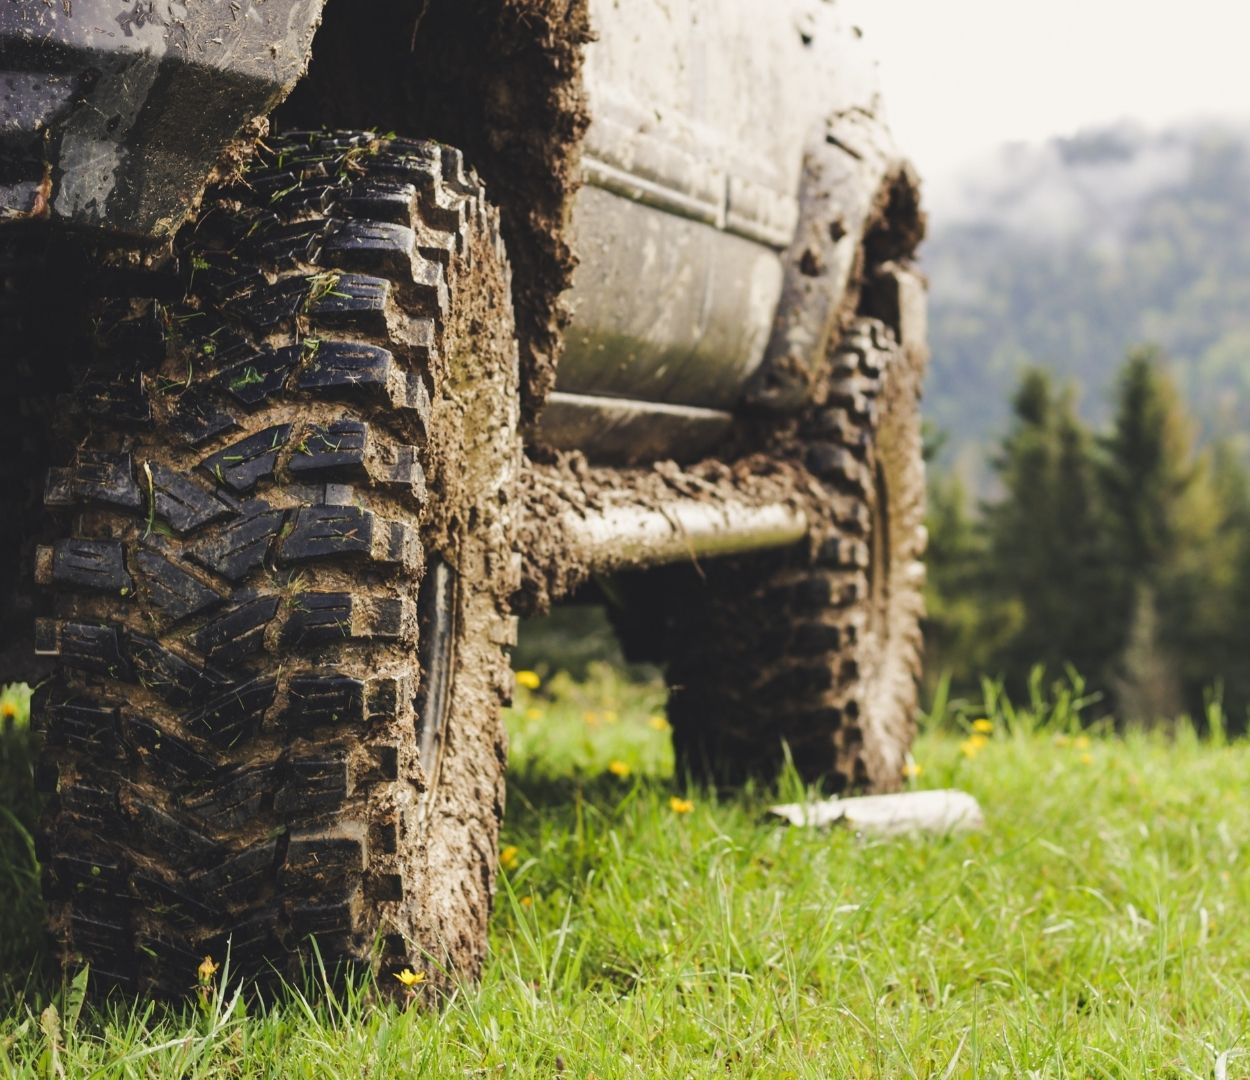 Top Hazards To Look Out for When Off-Roading